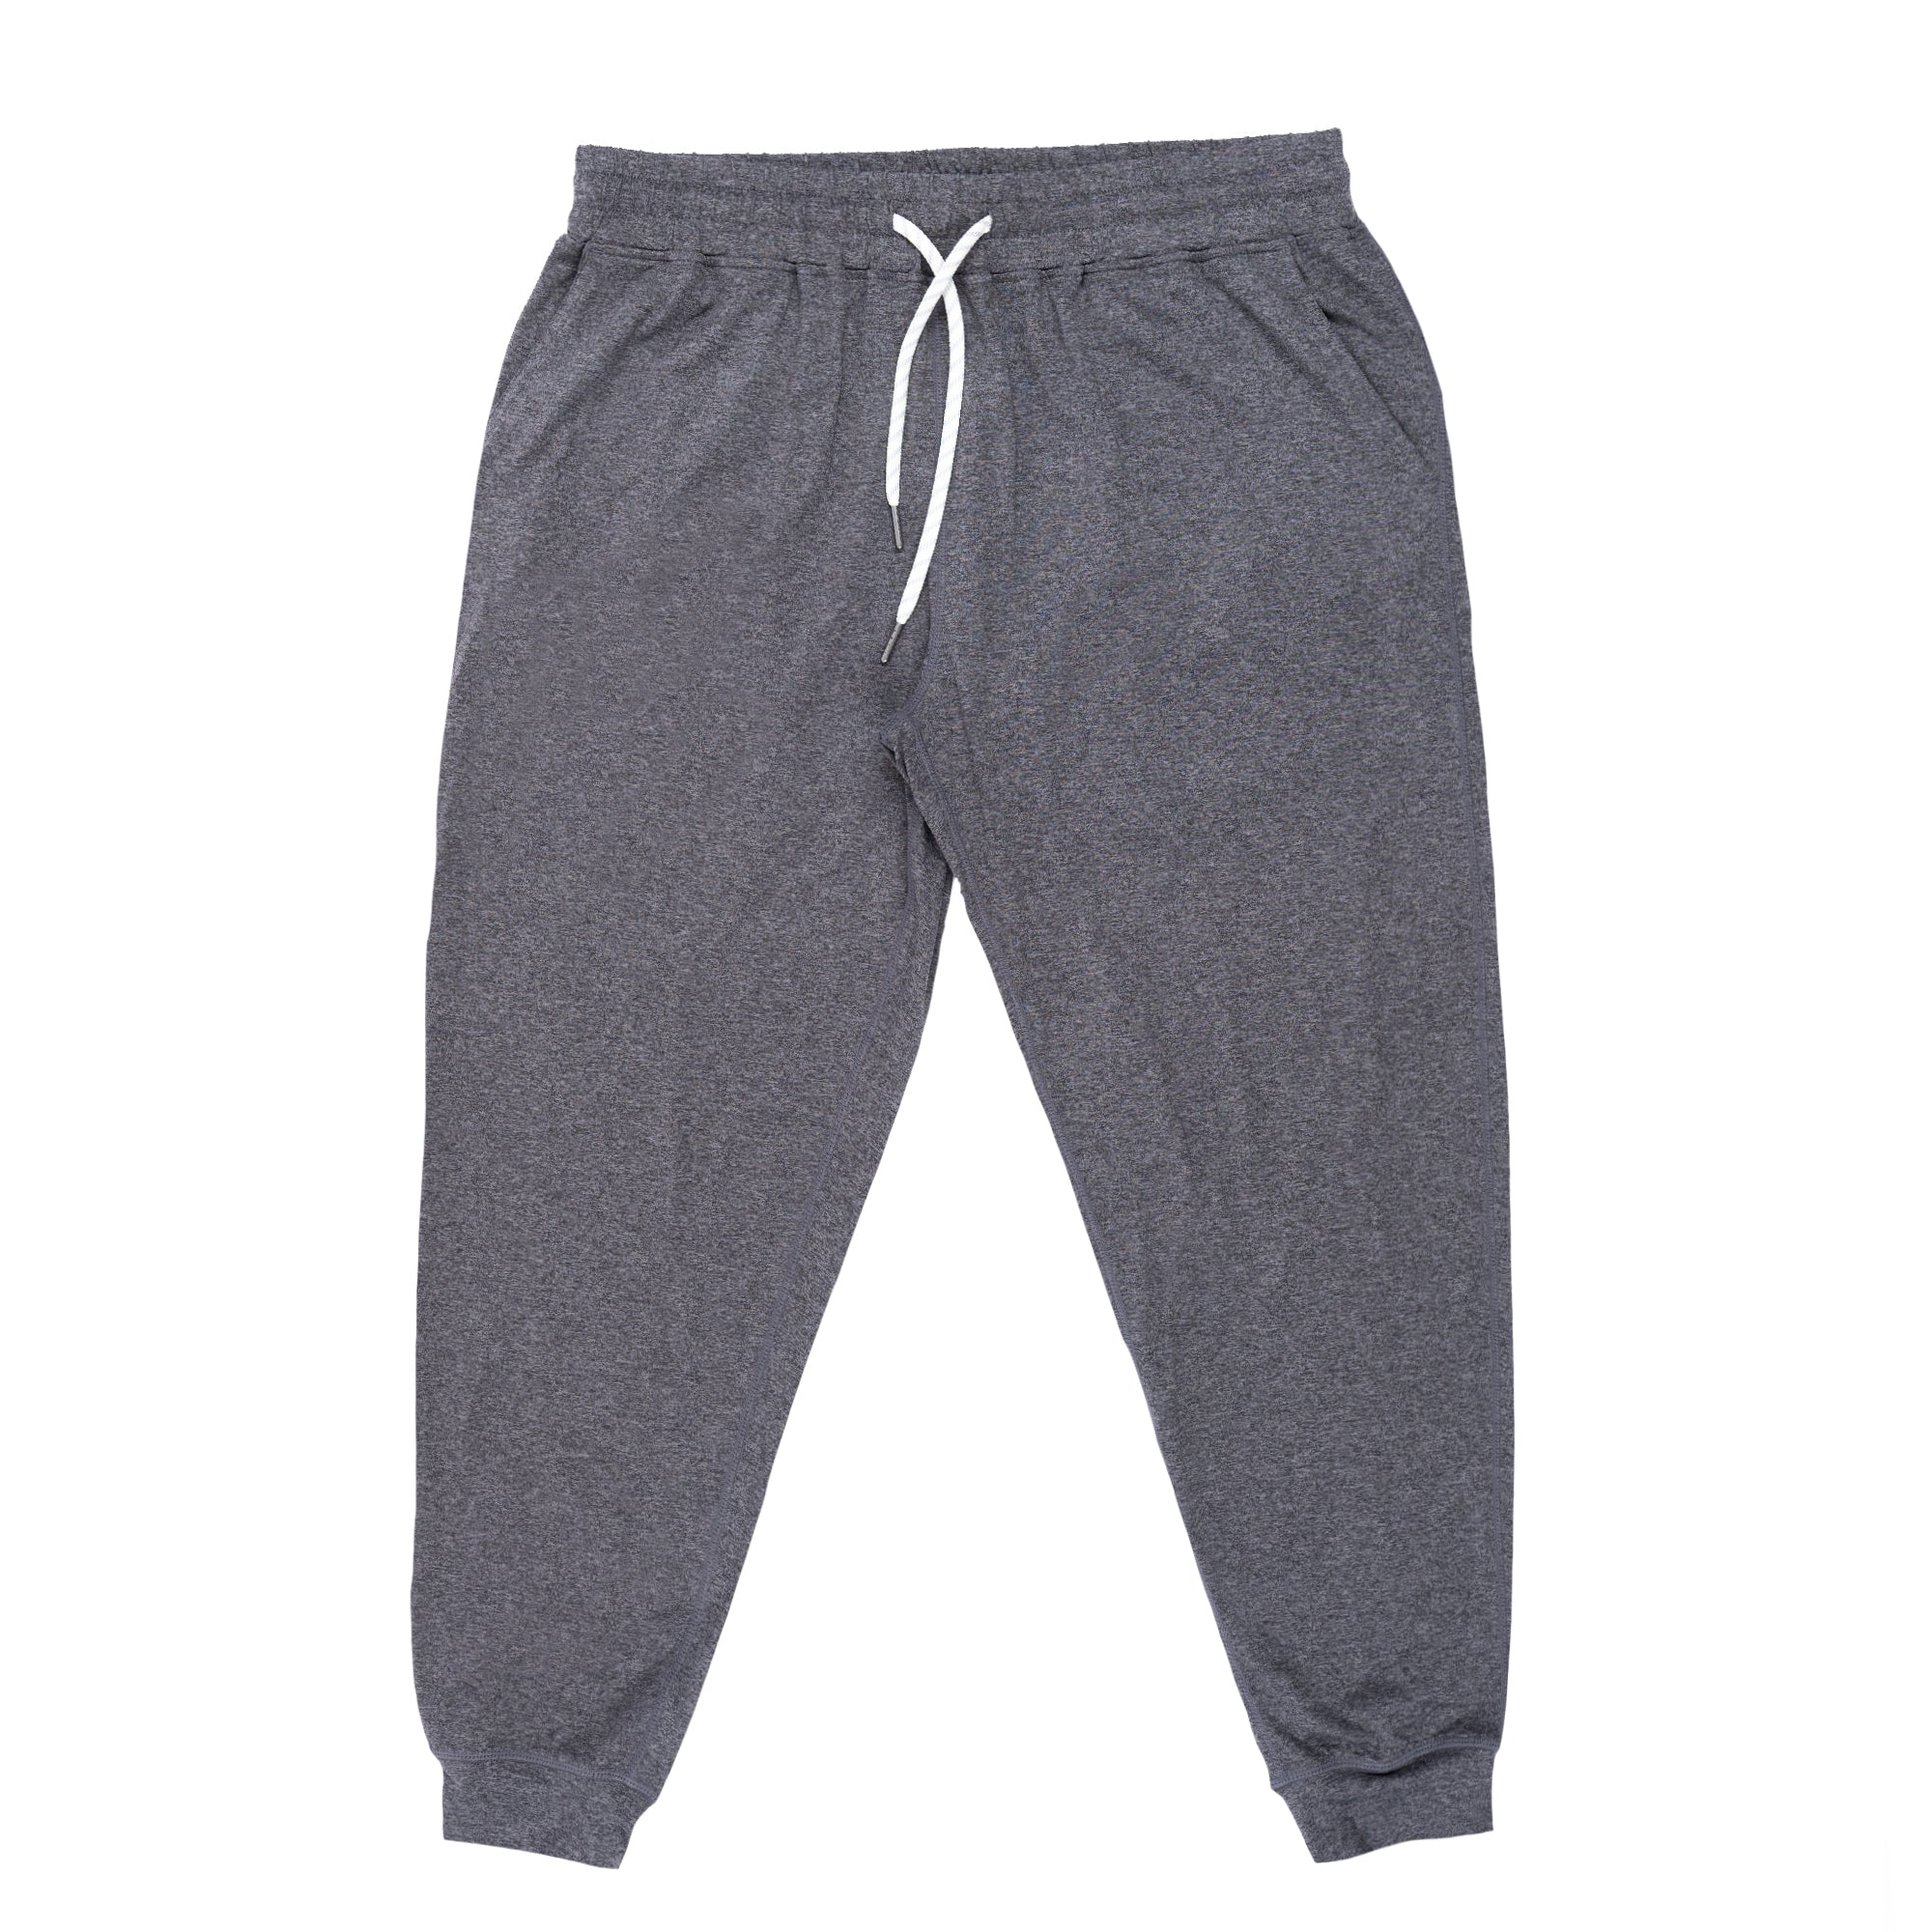 Buy heather-charcoal LADIES DAWN TO DUSK JOGGER